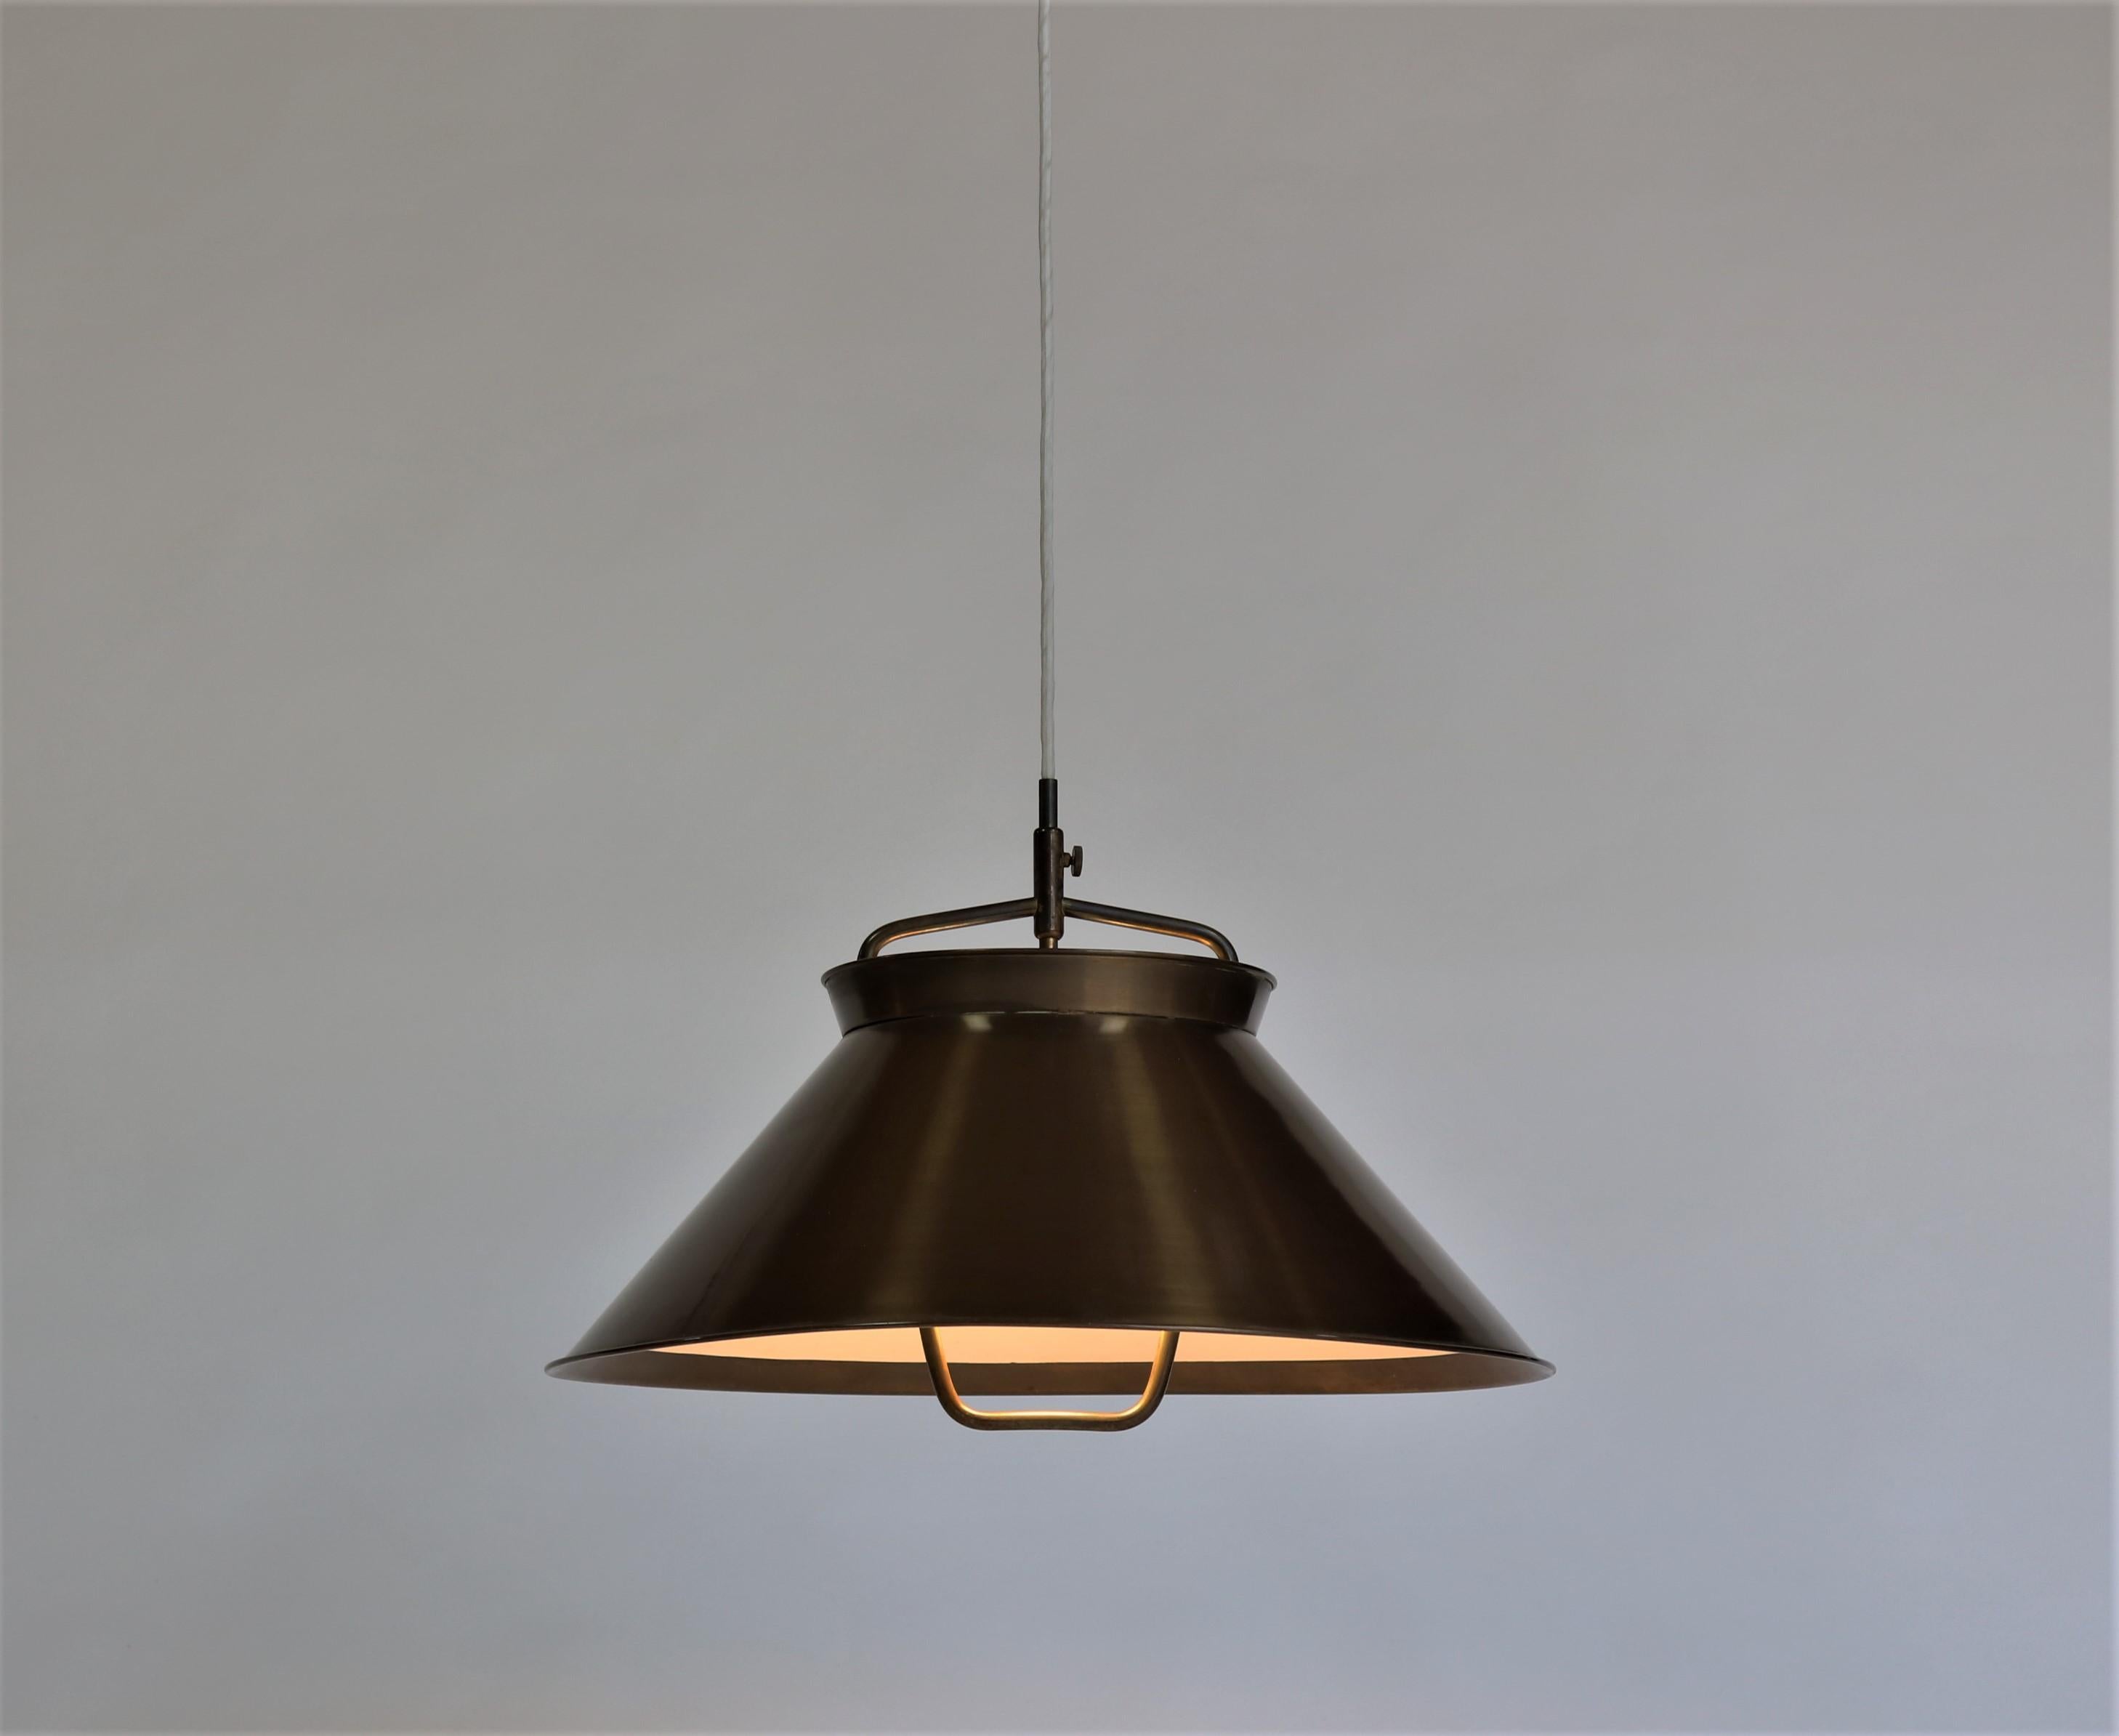 Beautiful and rare pendant in solid patinated brass with stunning patina. Very few of these lamps were produced at cabinetmaker Johannes Hansen in the early 1950s. The pendant was designed by Hans J. Wegner to accompany his iconic furniture at